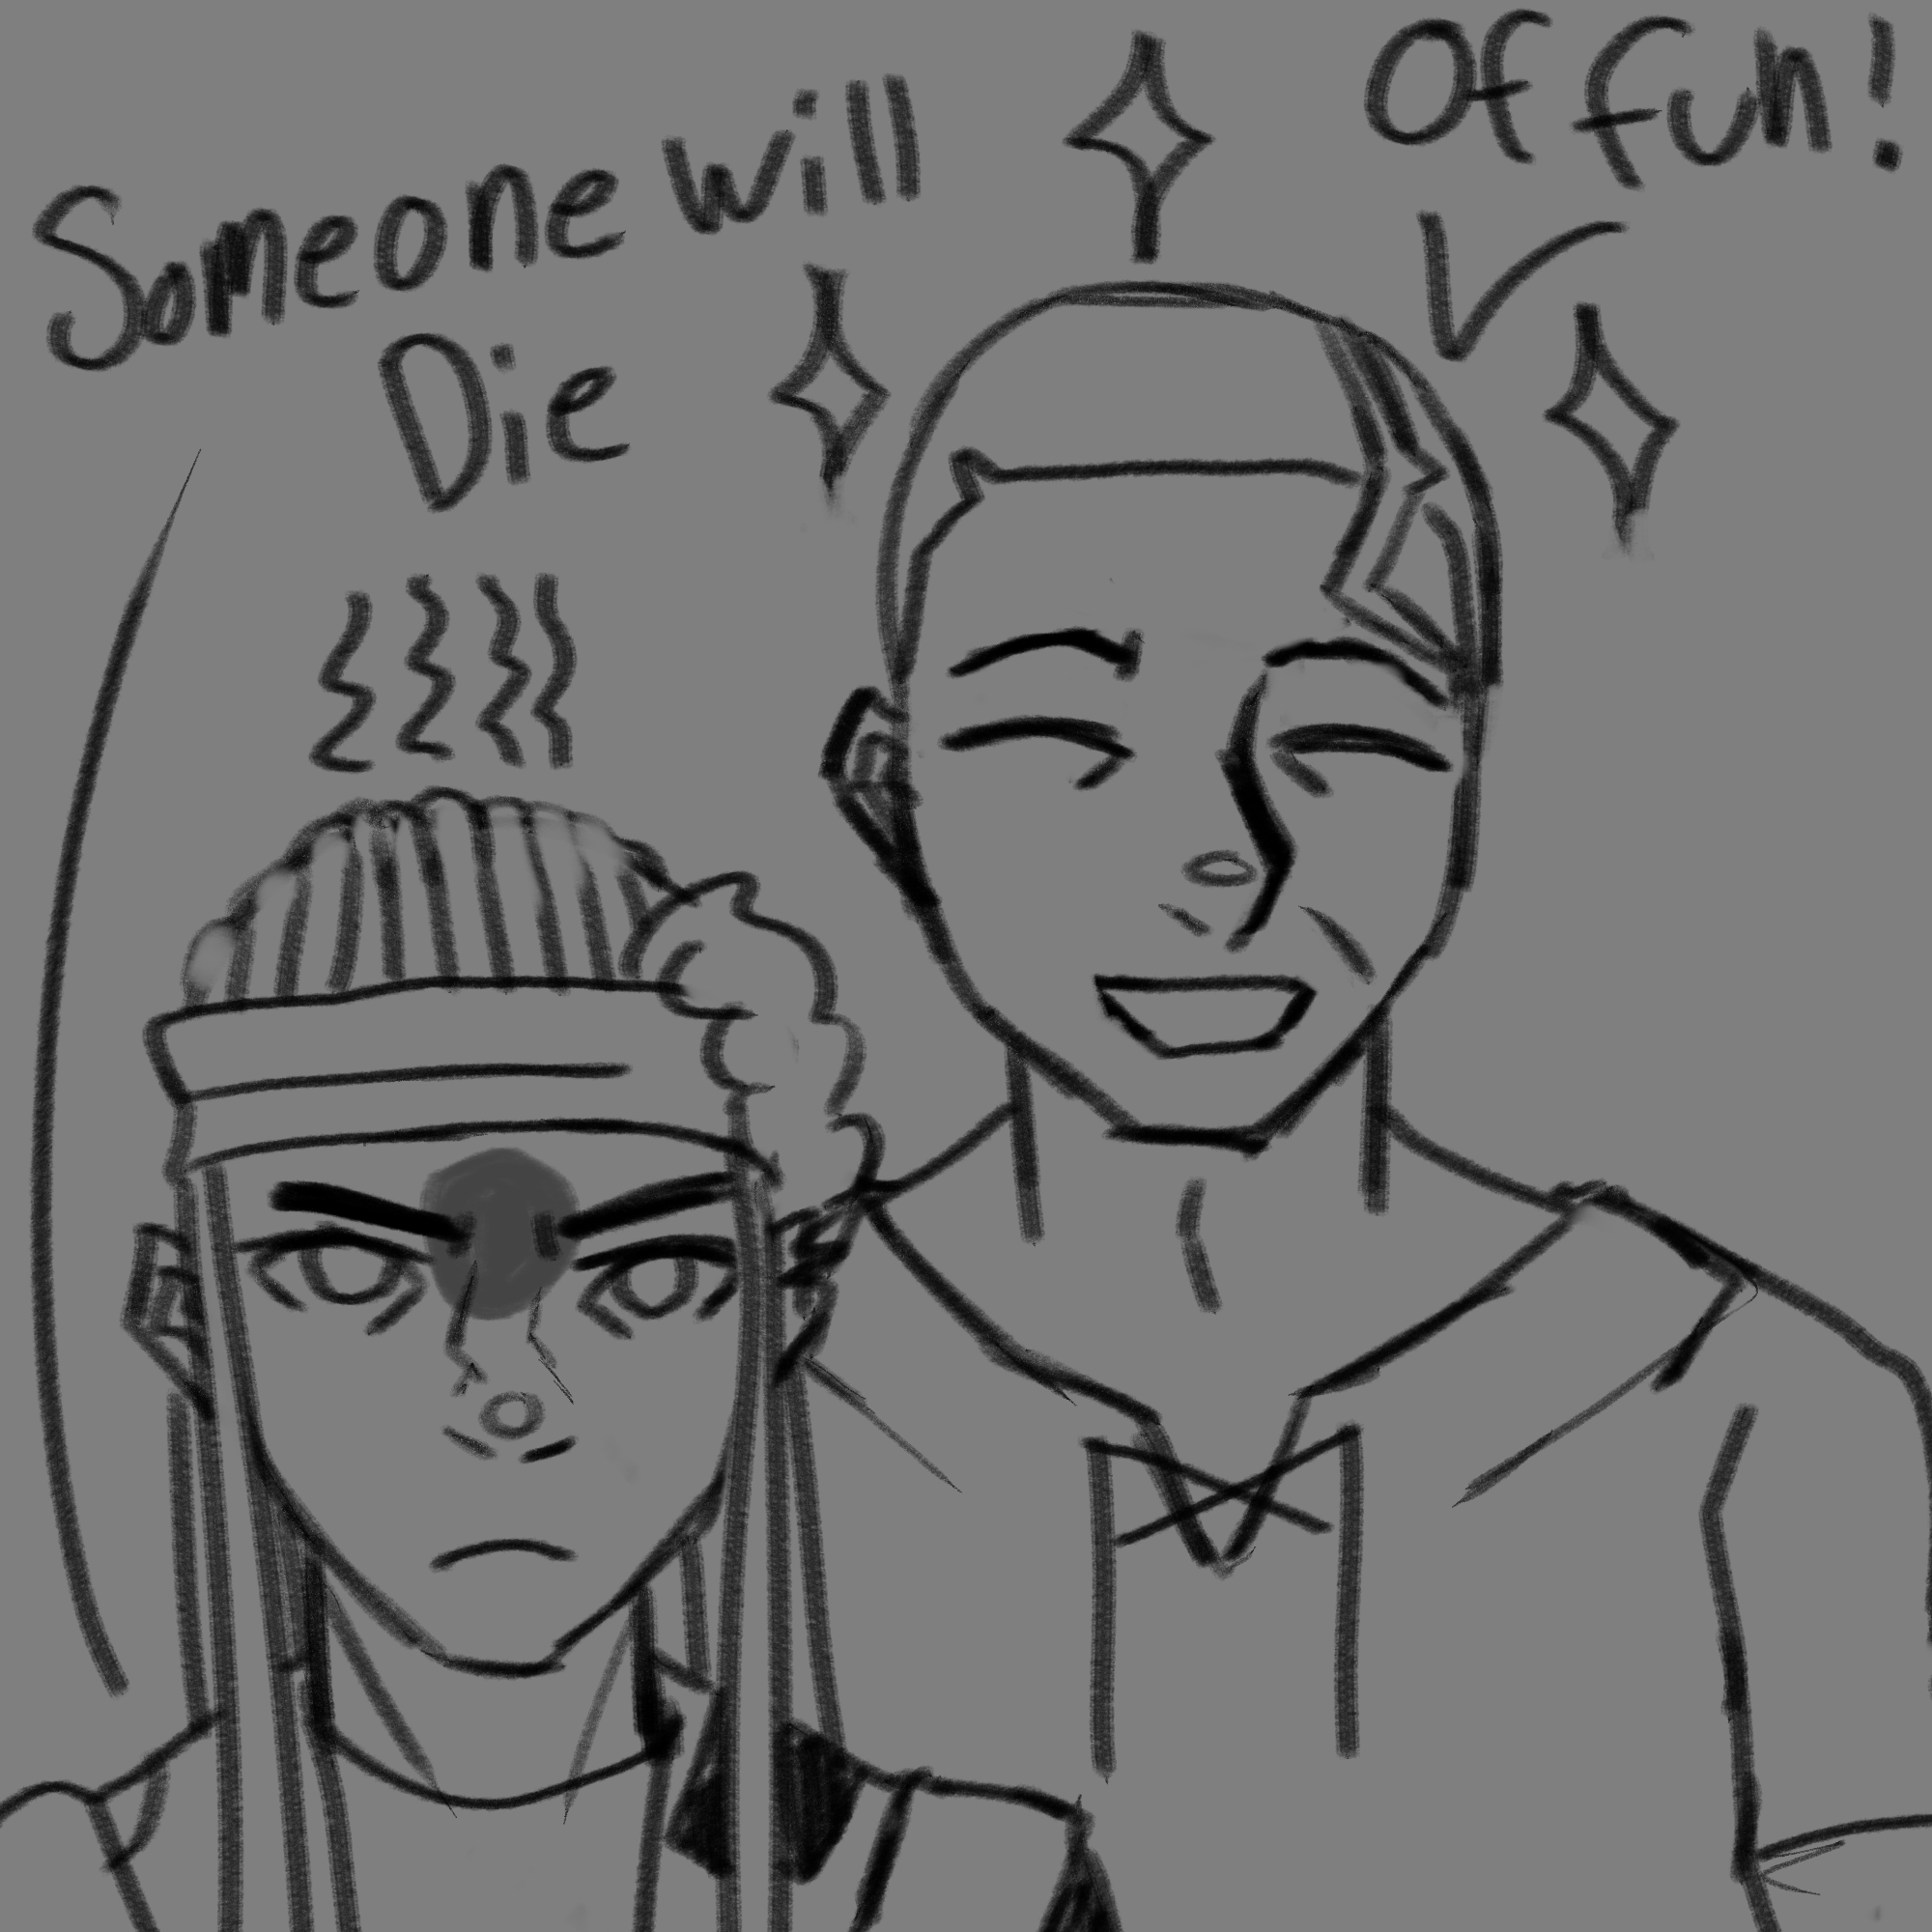 An uncolored sketch of two men standing next to eachother. One of them says 'someone will die.' The other interjects 'of fun!'